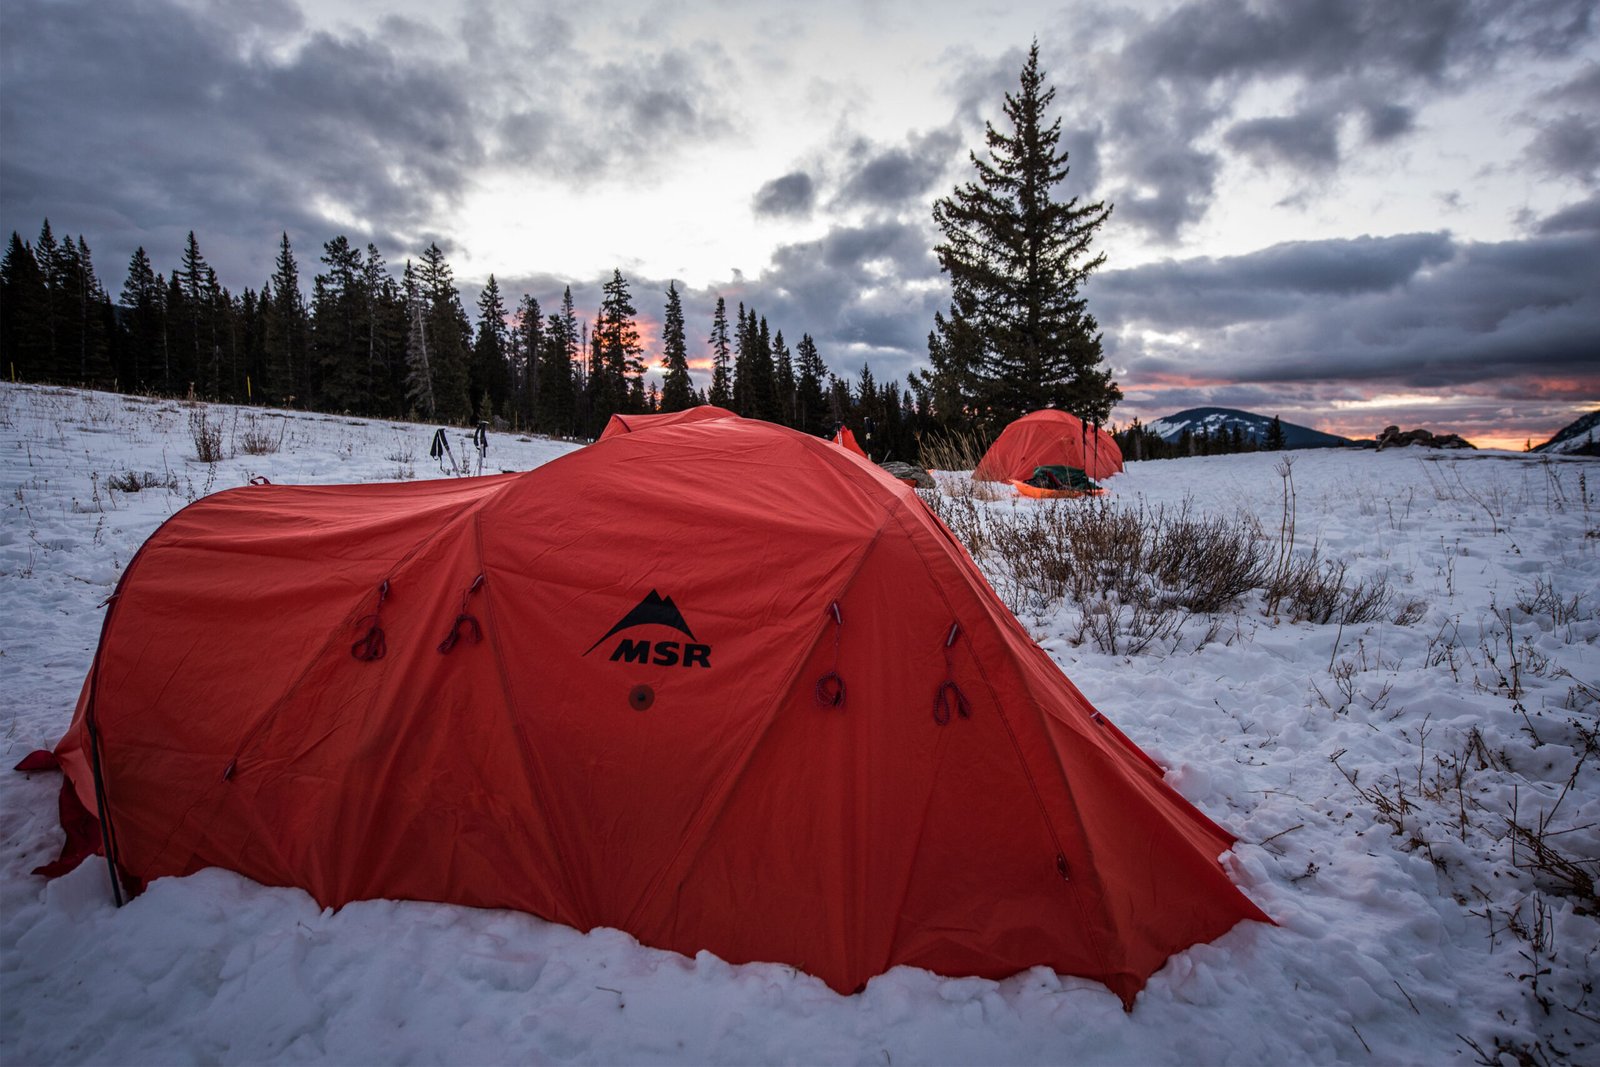 How to Master 4-Season Tents in Any Weather?